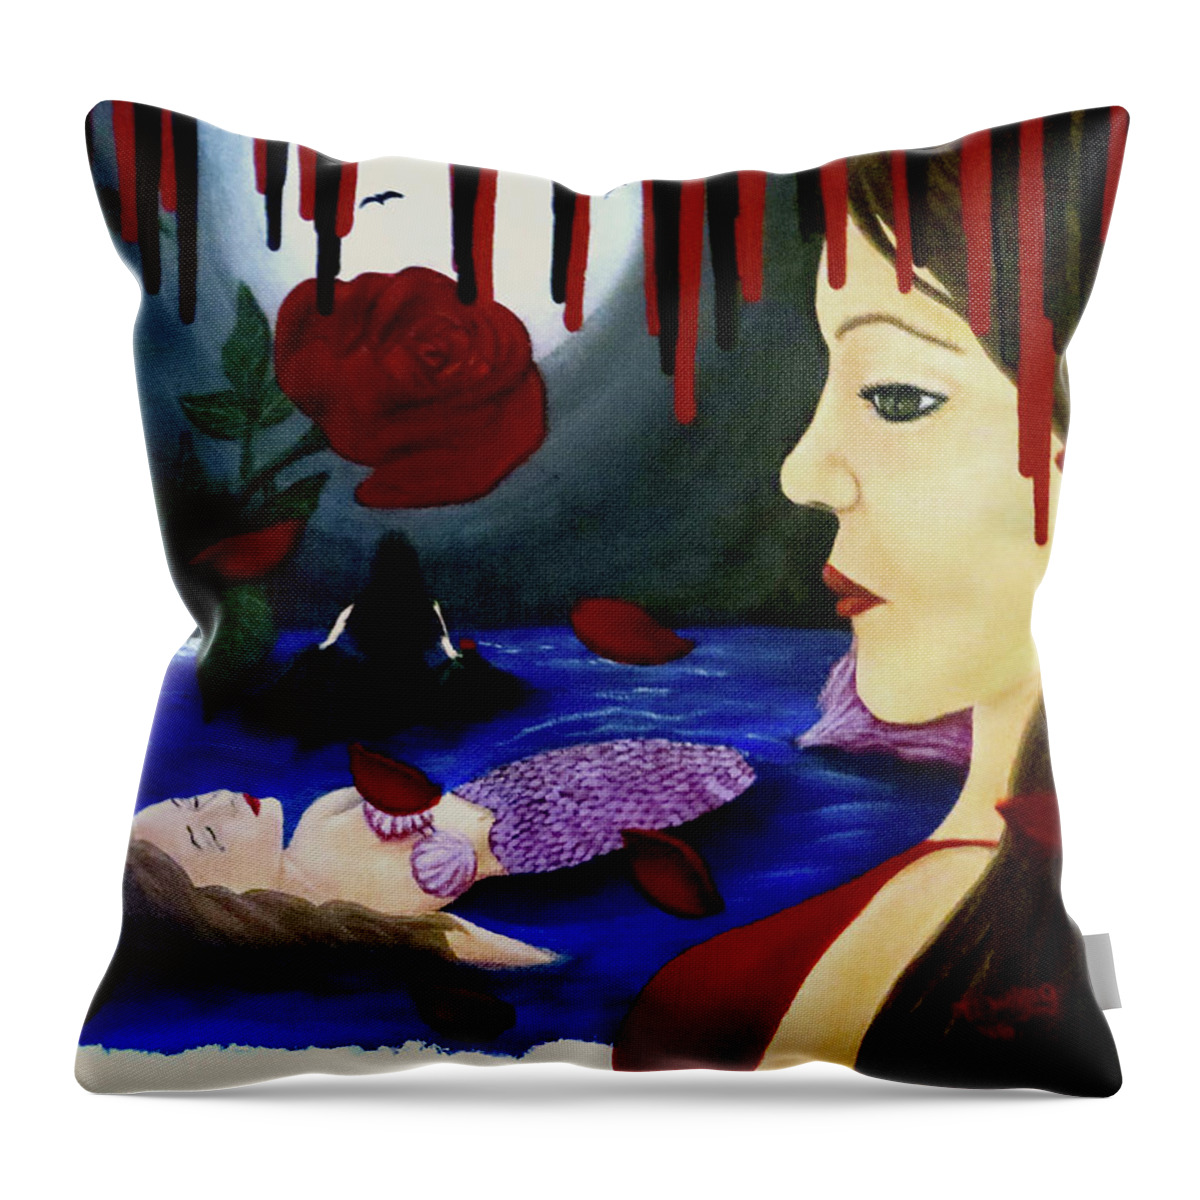 Mermaid Throw Pillow featuring the painting Betrayal by Teresa Wing